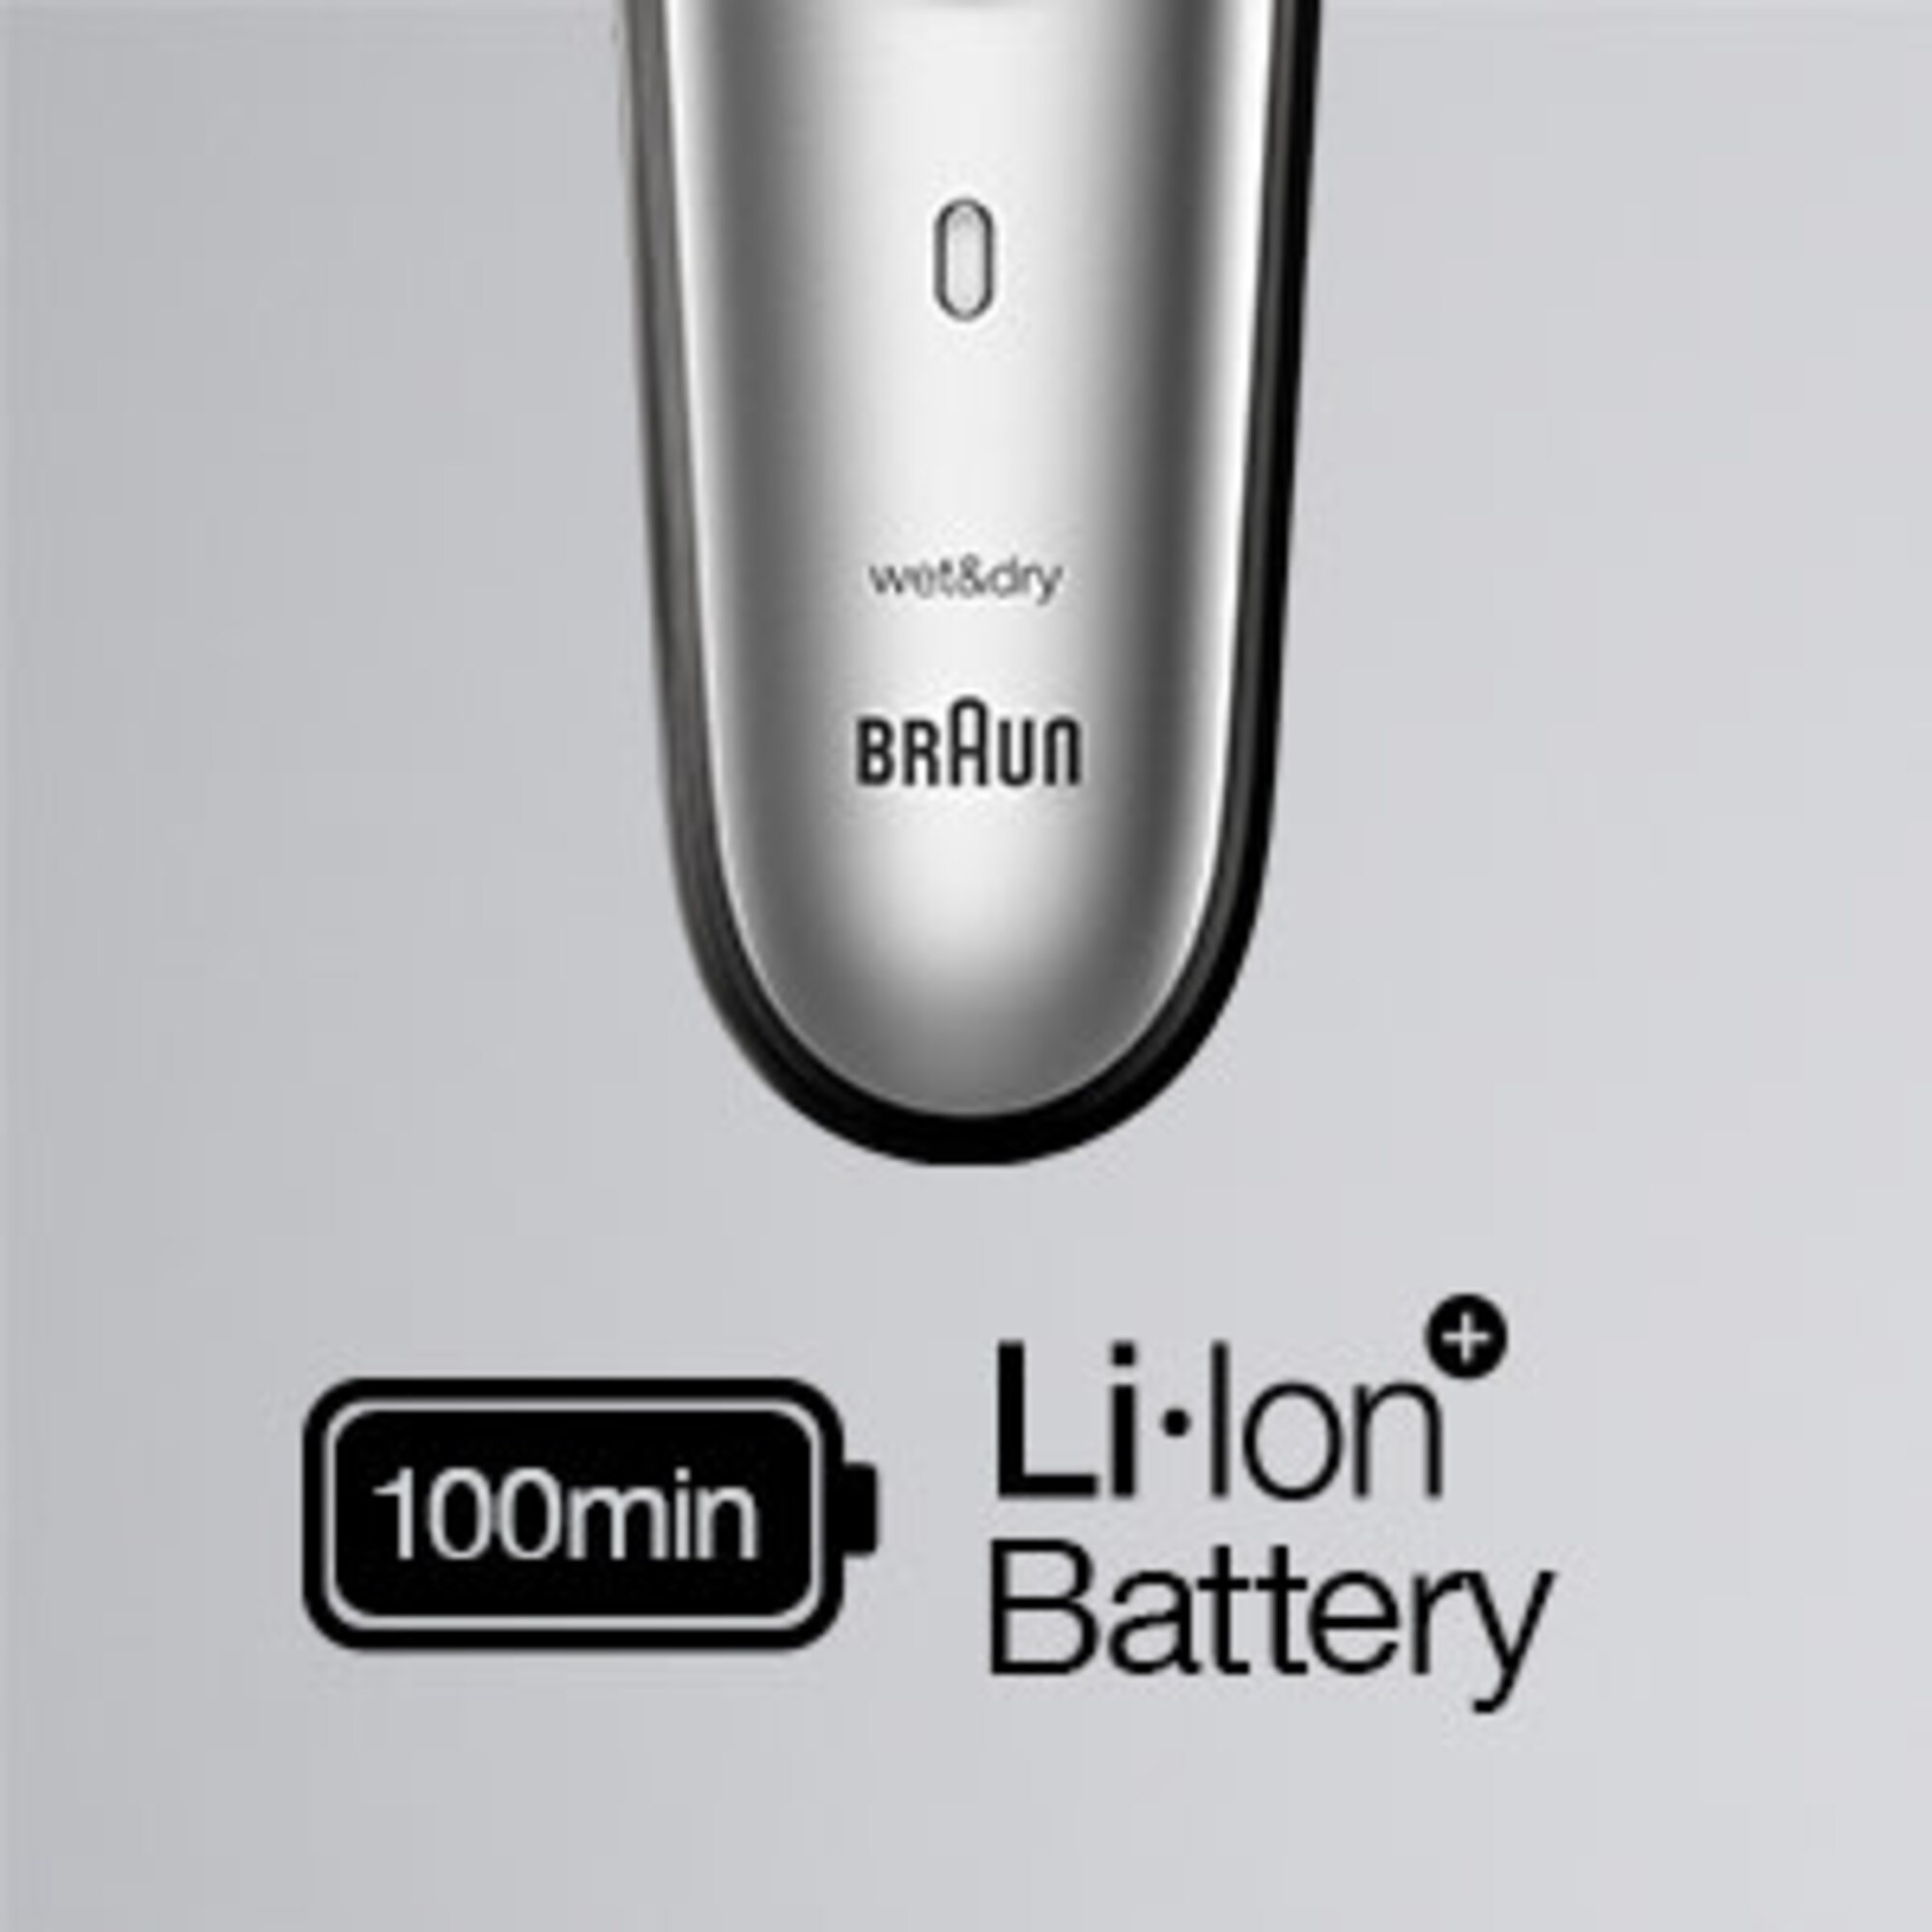 Long Lasting Lithium-Ion battery